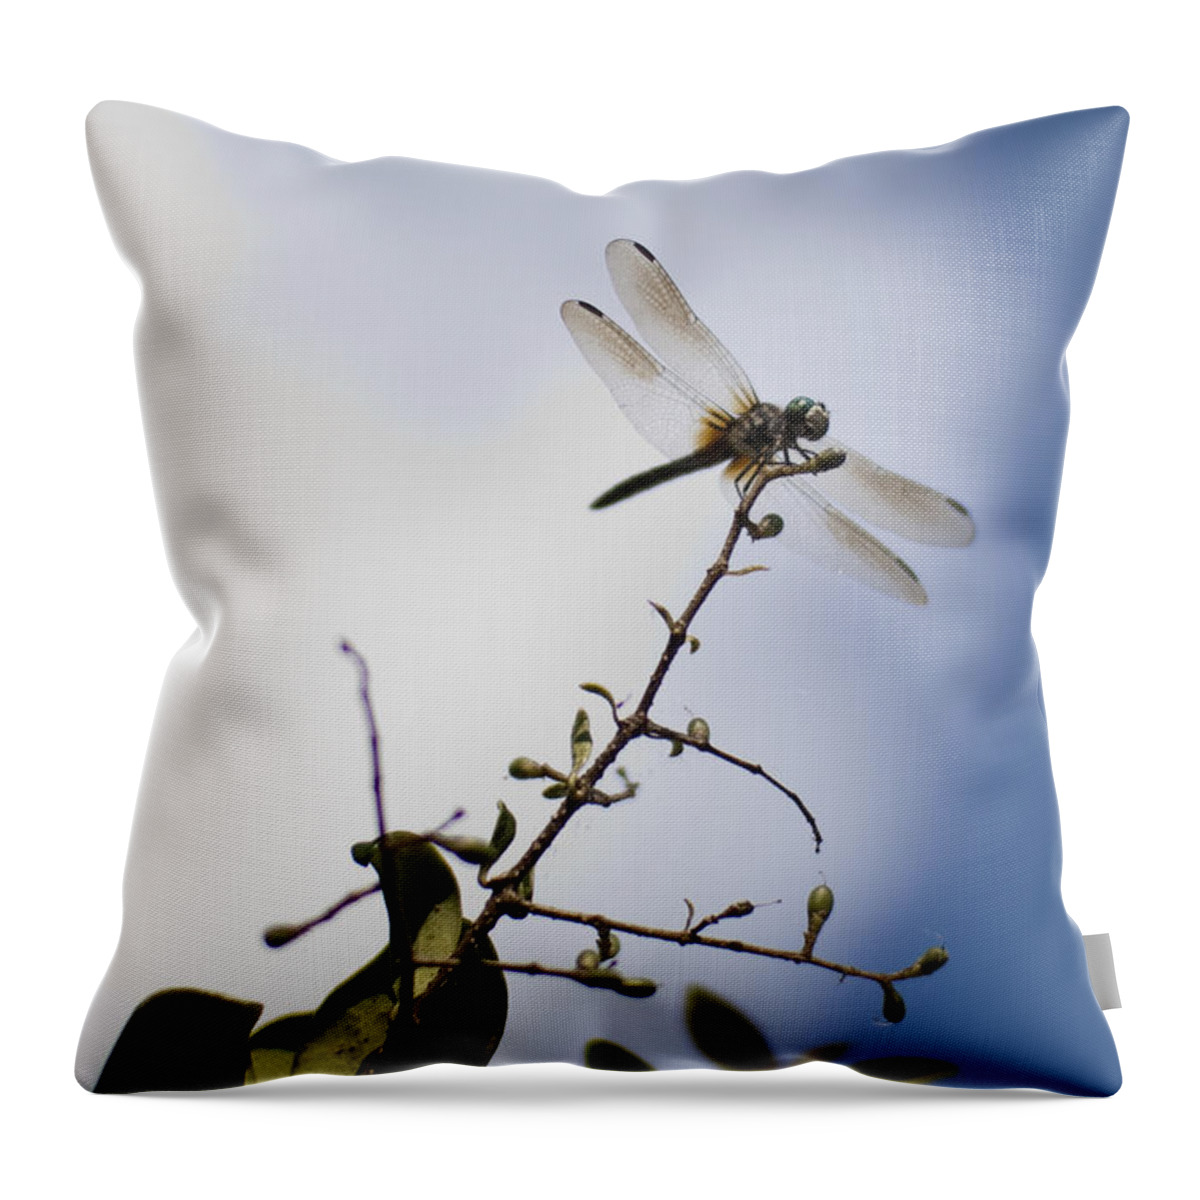 Dragonfly Throw Pillow featuring the photograph Dragonfly On A Limb by Dustin K Ryan